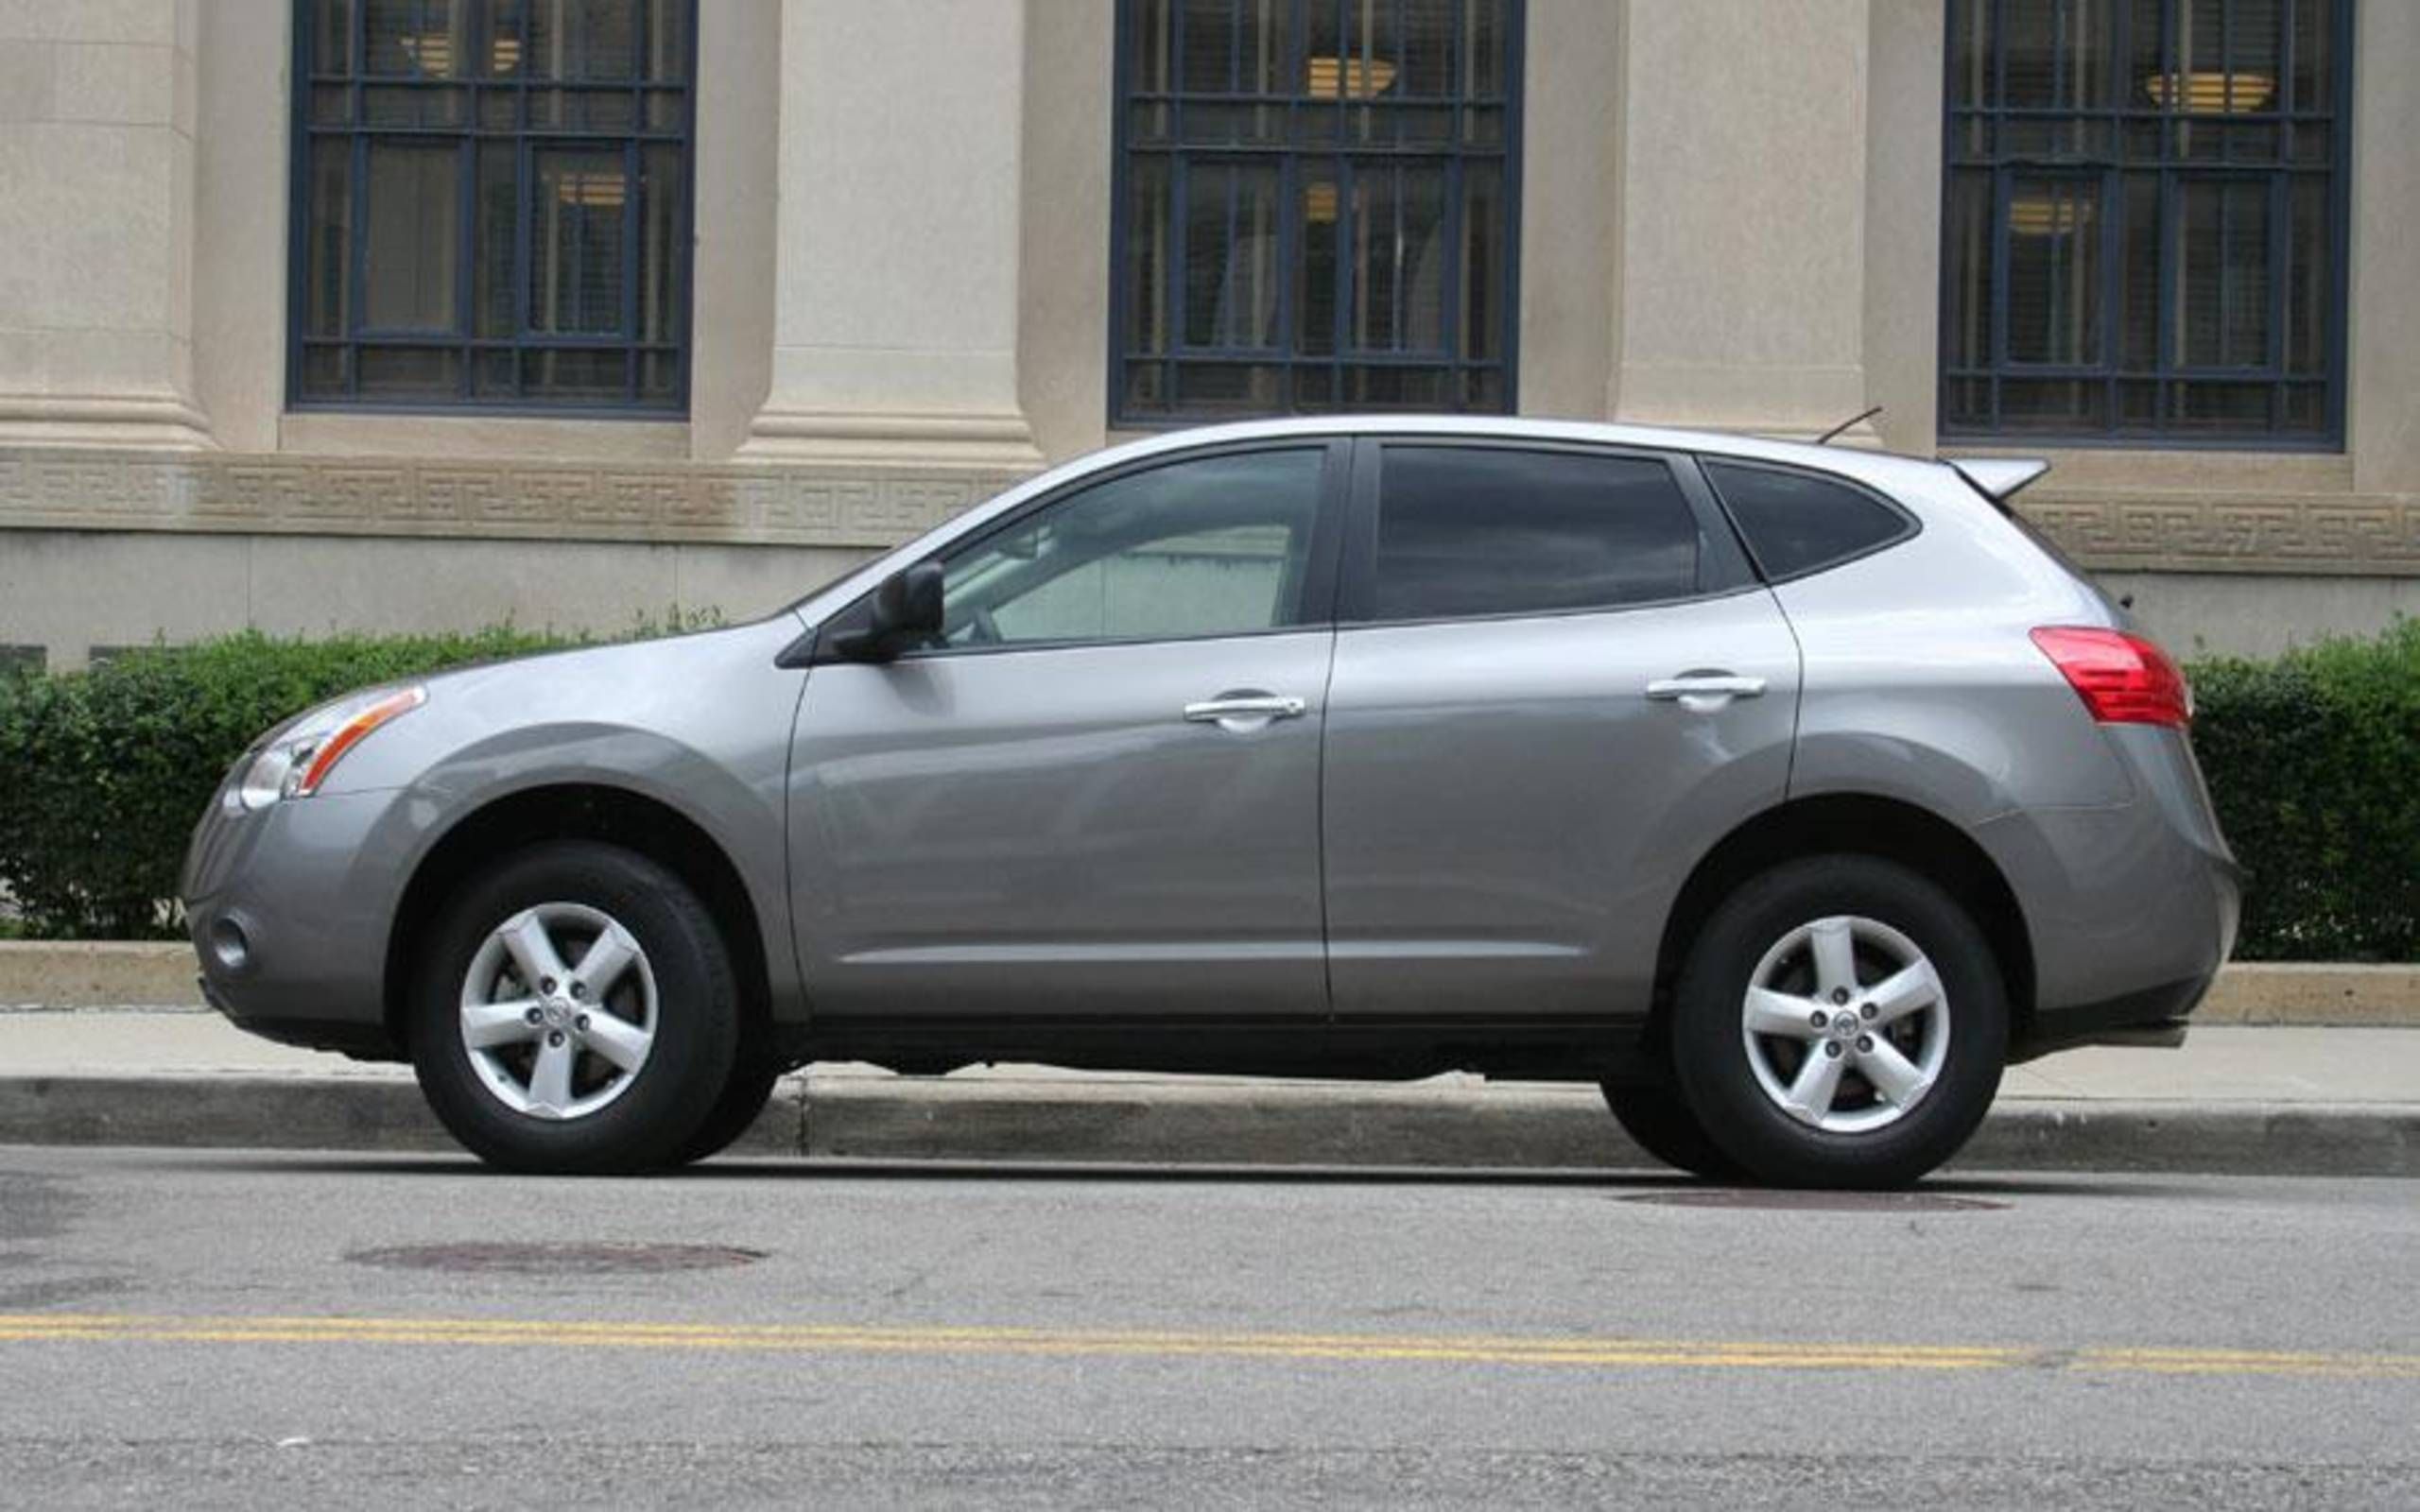 2010 Nissan Rogue S AWD: What I drove last night